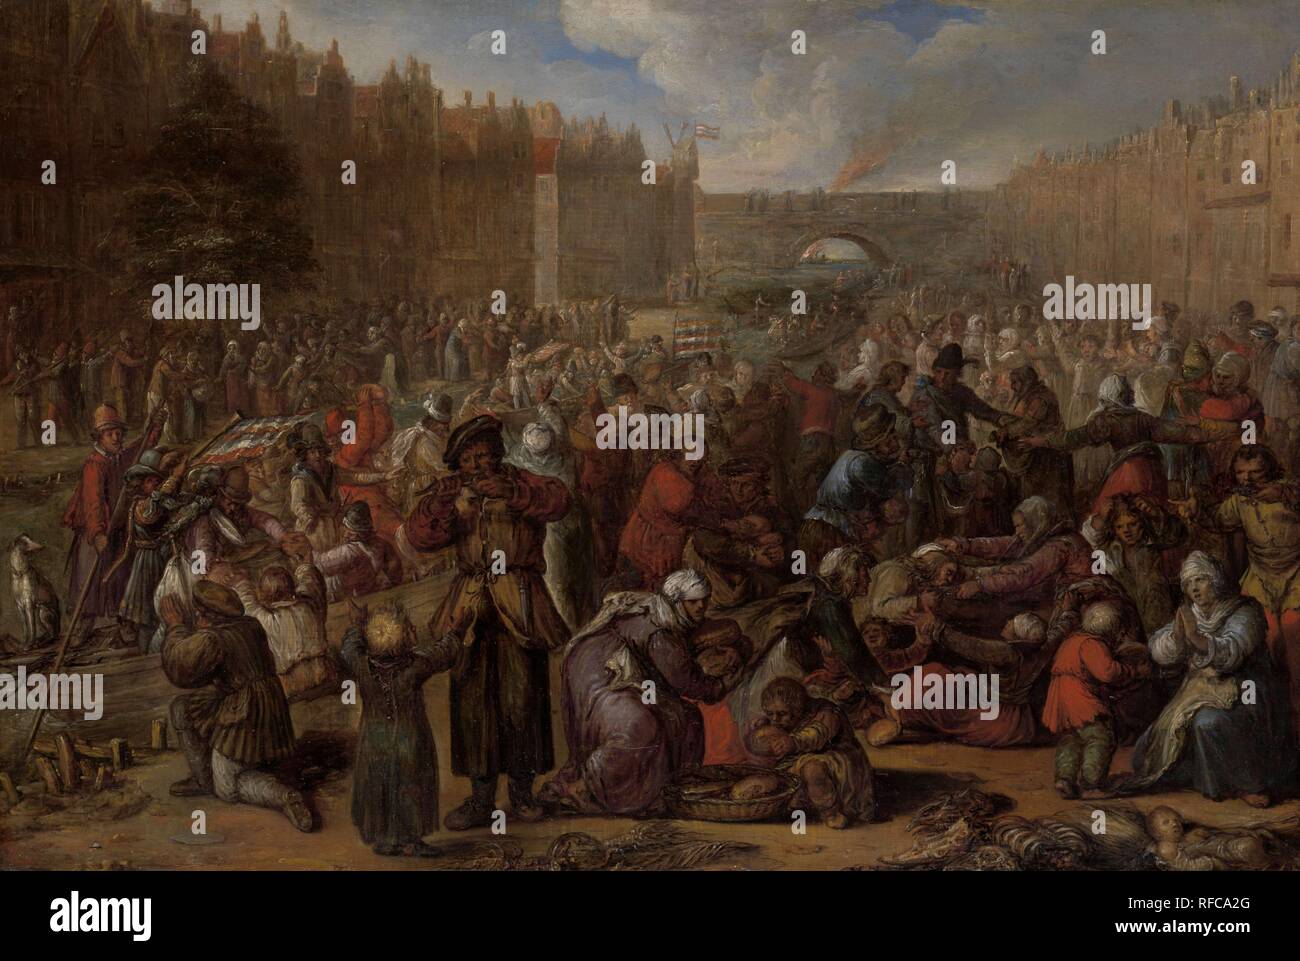 The Famished People after the Relief of the Siege of Leiden. Distribution of Herring and White Bread at the Relief of Leiden, 3 October 1574. Dating: 1574 - 1629. Measurements: h 40 cm × w 59.5 cm; d 8.5 cm. Museum: Rijksmuseum, Amsterdam. Author: OTTO VAN VEEN. Stock Photo